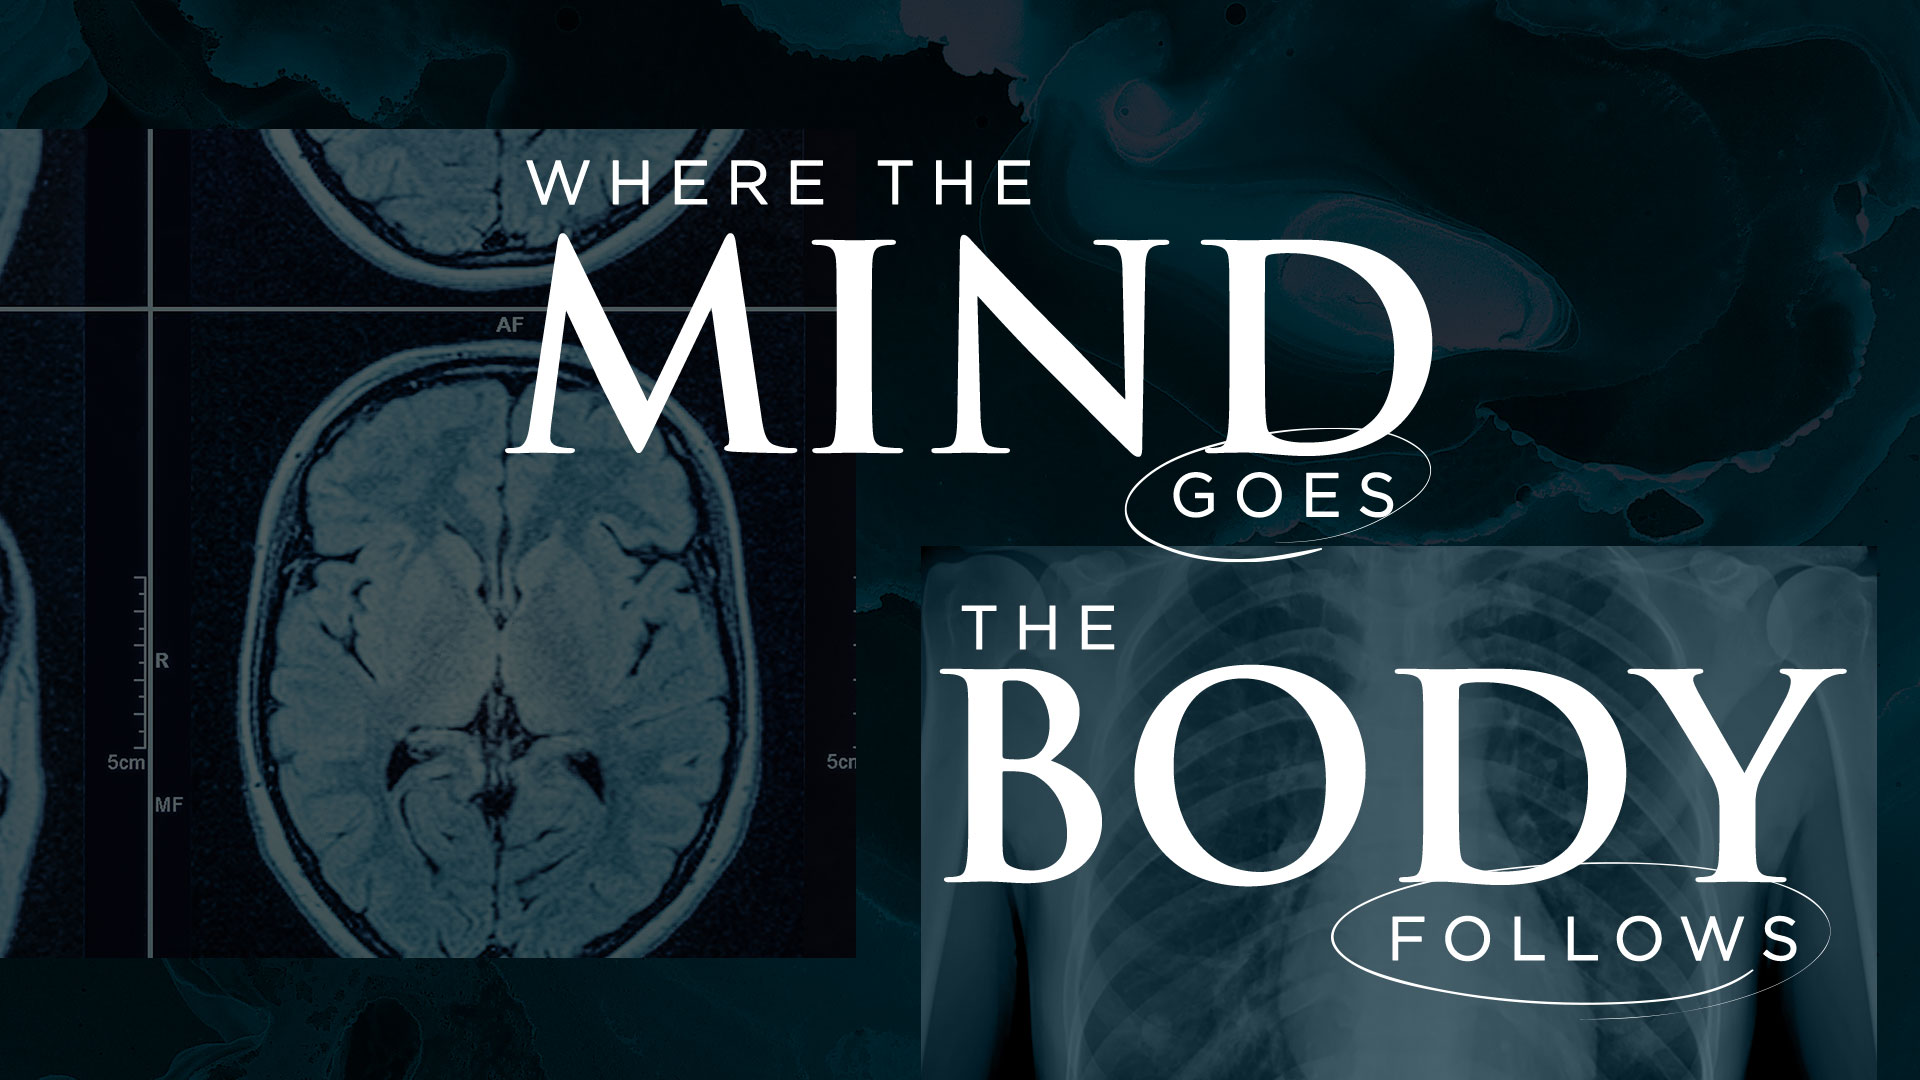 Where The Mind Goes, The Body Follows